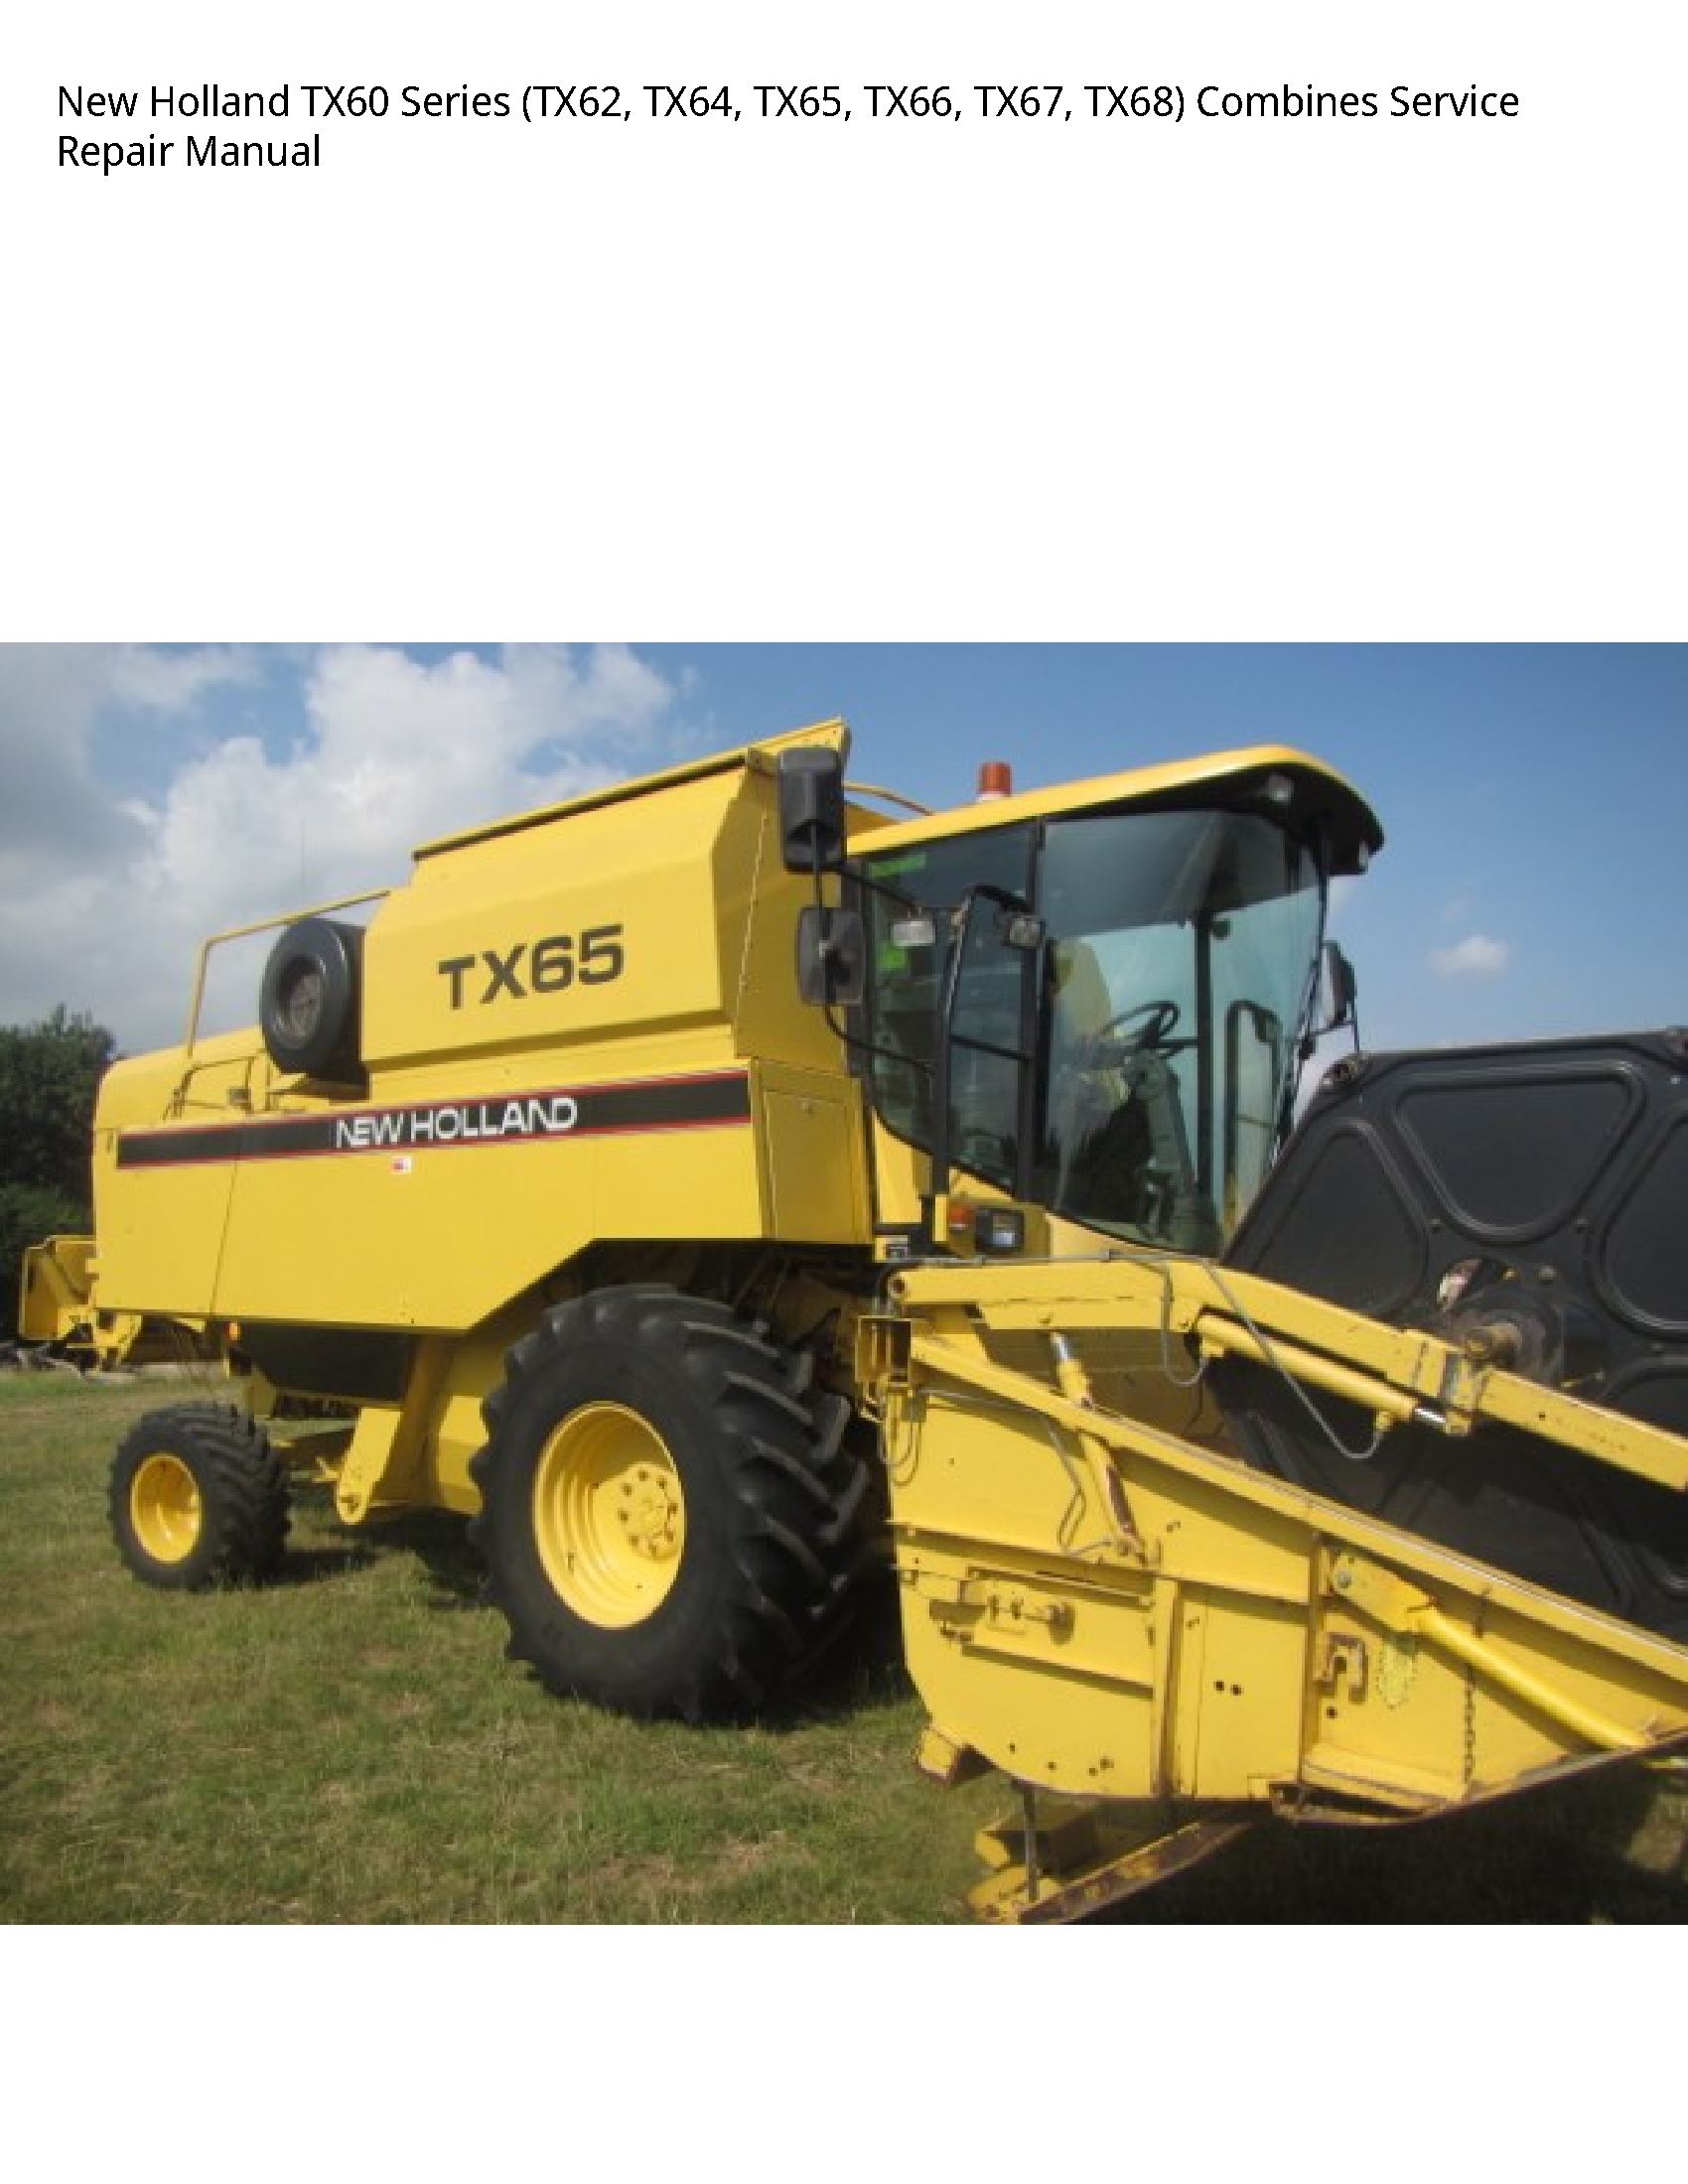 New Holland TX60 Series Combines manual